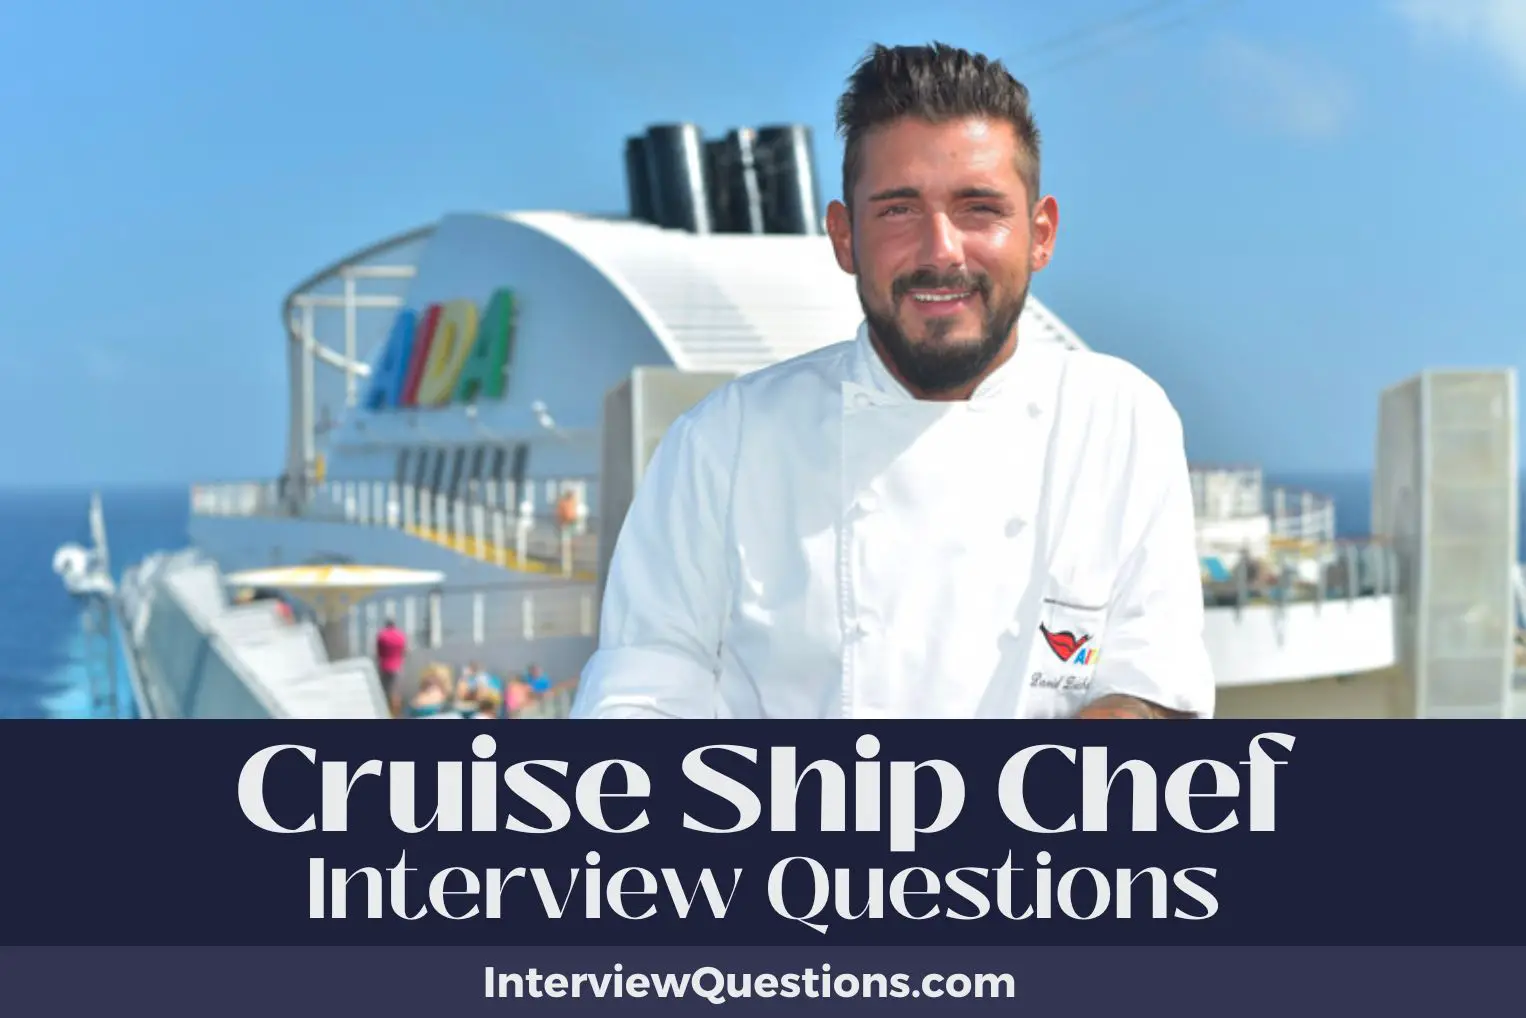 Cruise Ship Chef Interview Questions